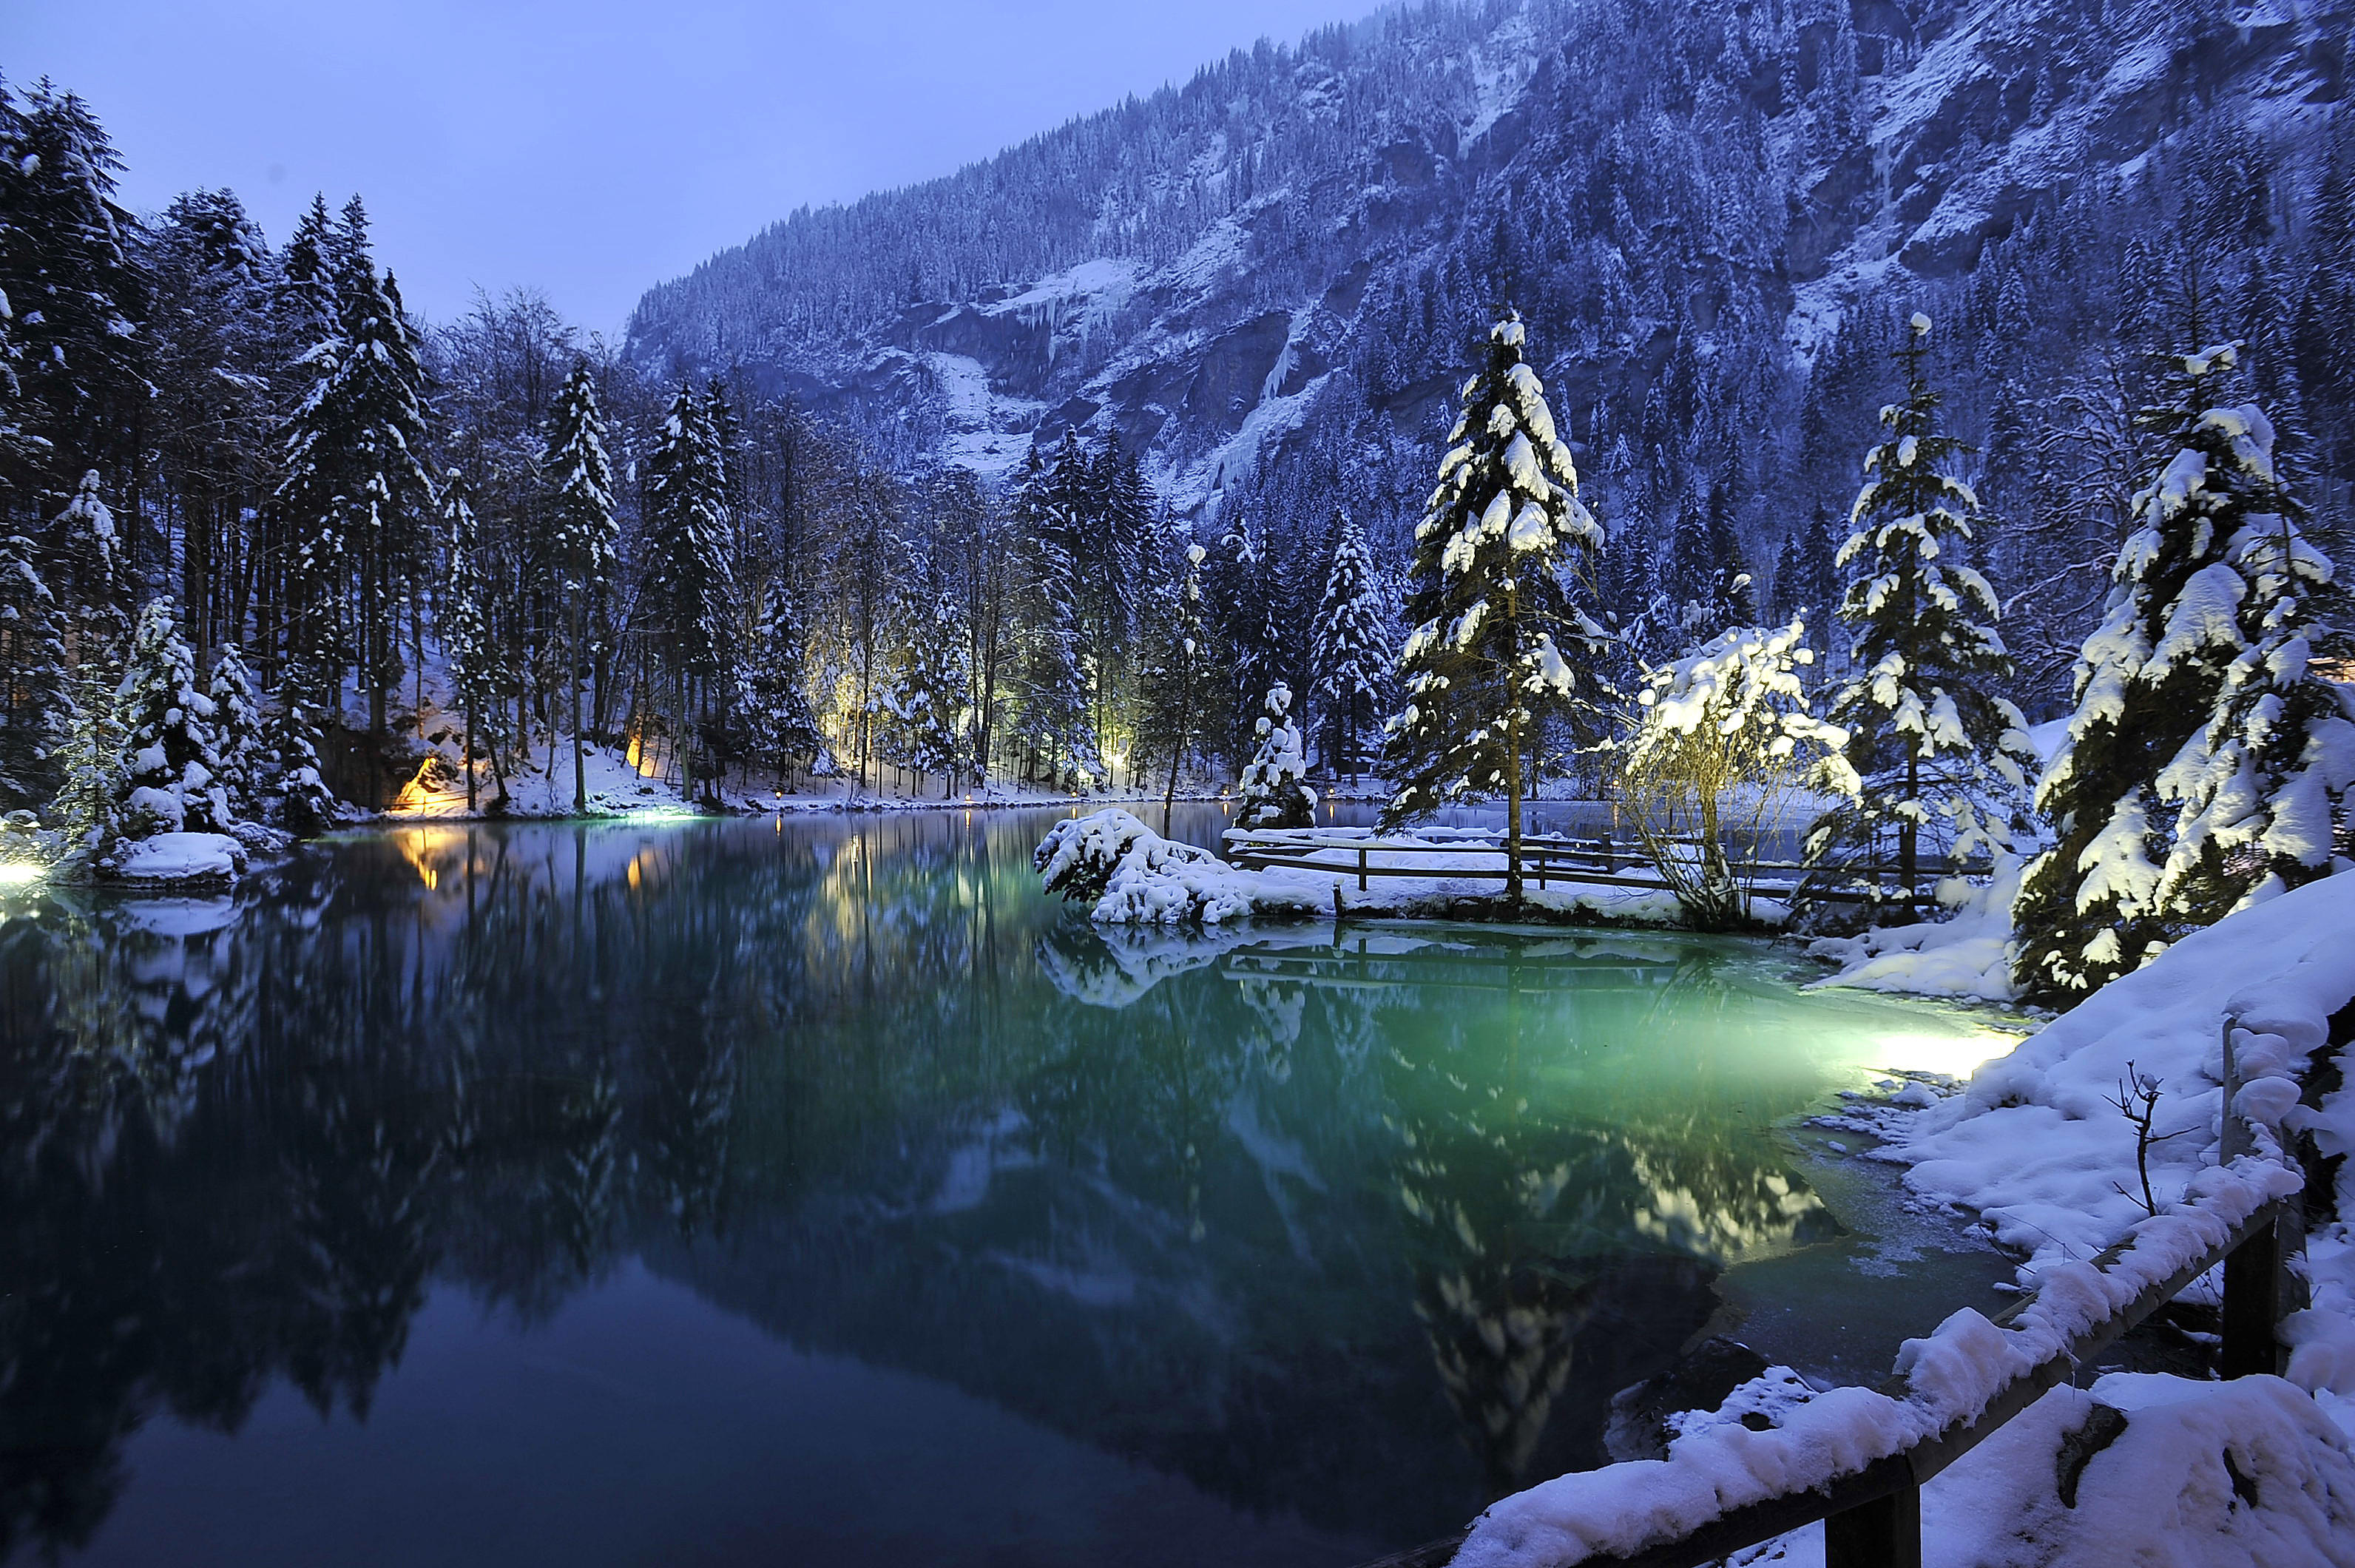 Wallpaper. Winter. photo. picture. Switzerland, winter, mountains, trees, the lake